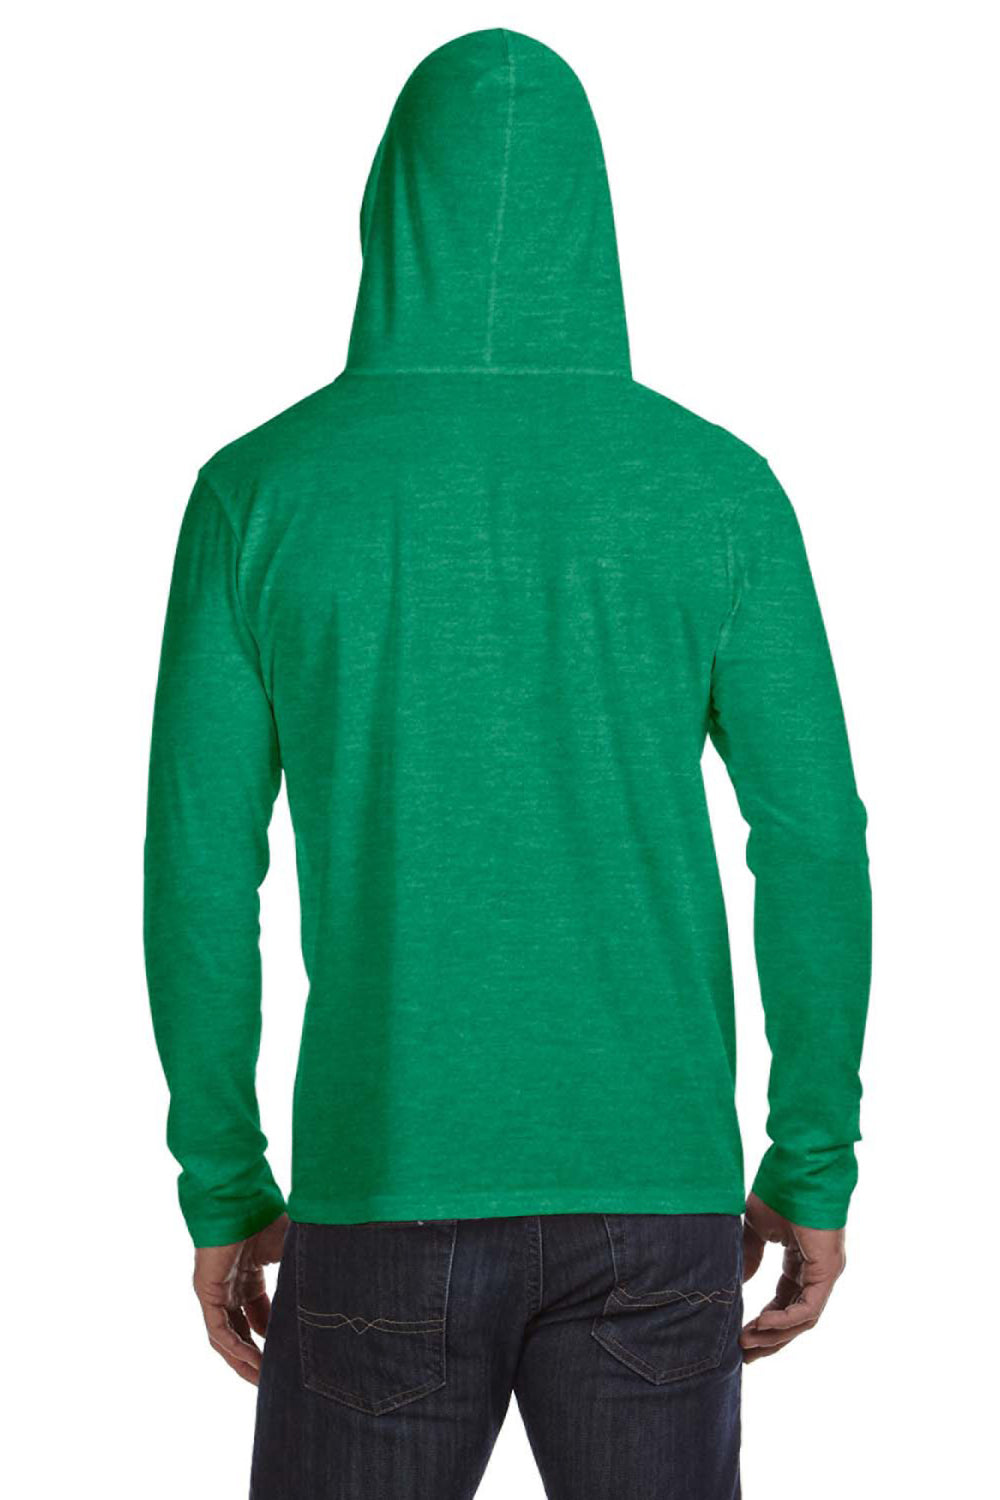 Anvil 987AN Mens Long Sleeve Hooded T-Shirt Hoodie Heather Green/Neon Yellow Back